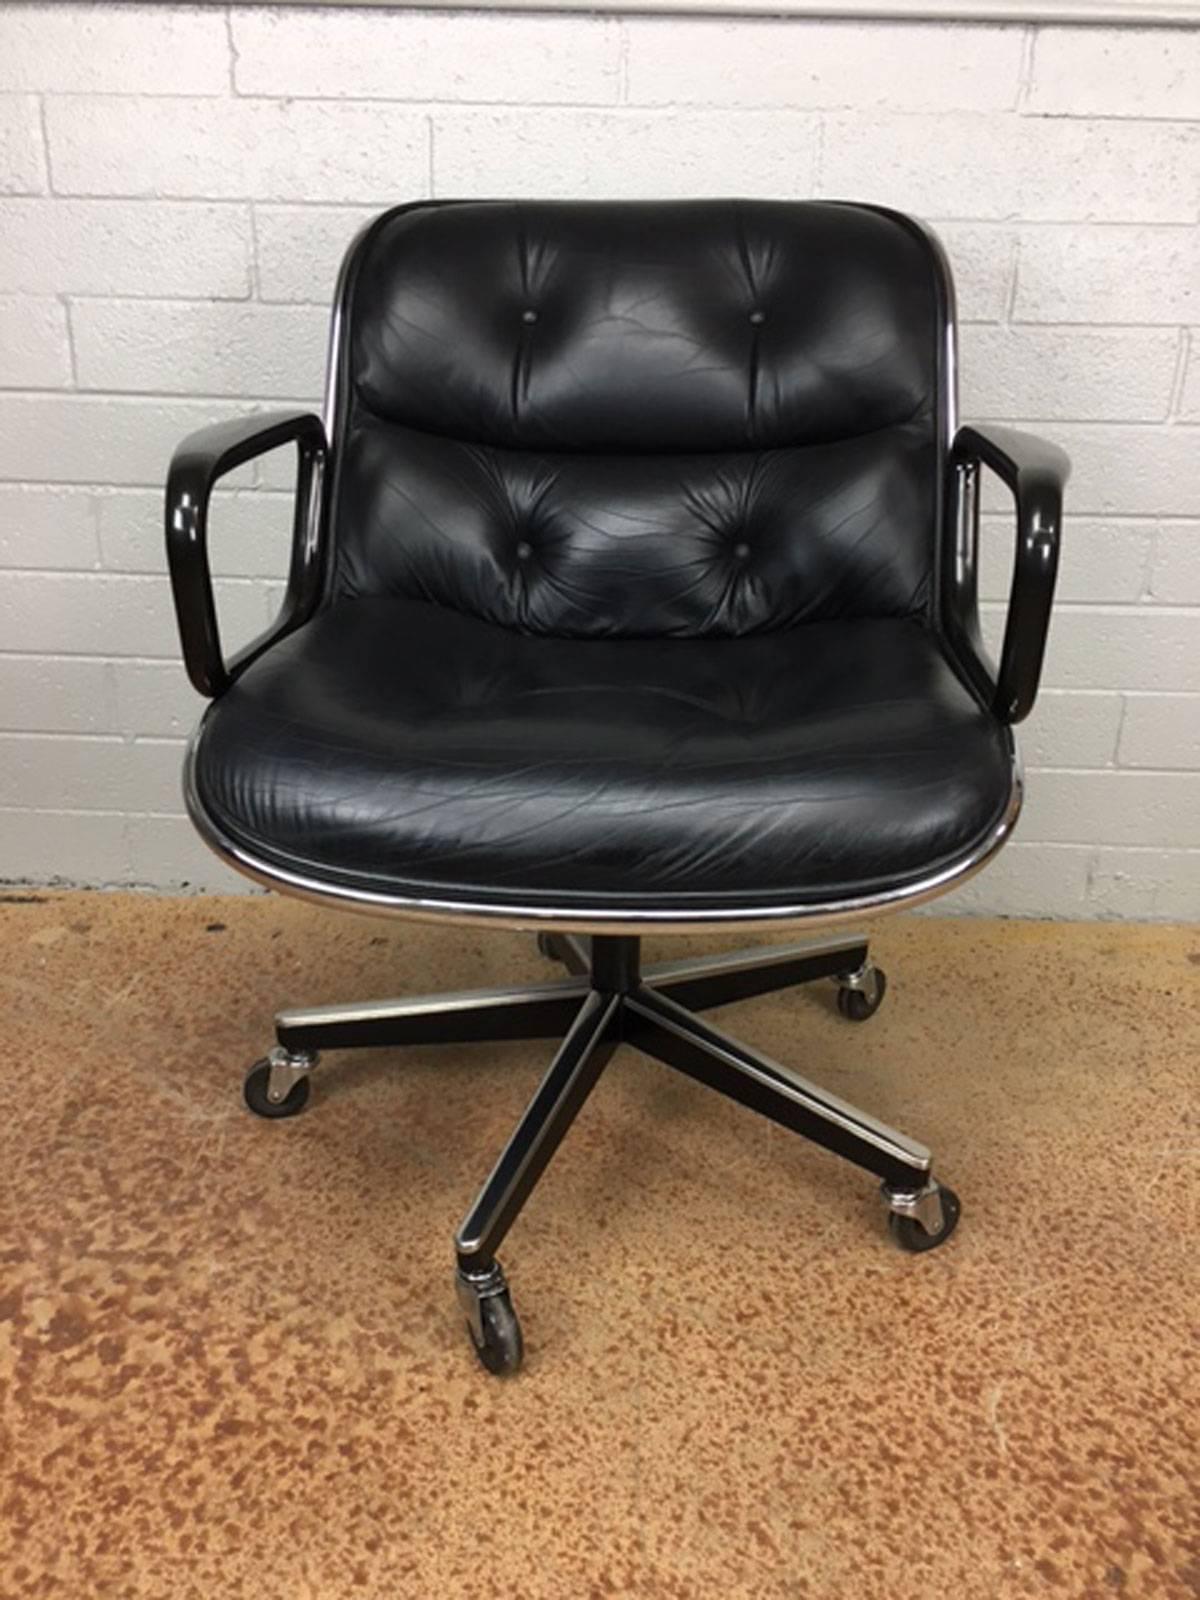 Timeless, high quality executive chairs for Knoll first introduced in 1965 and still in production today. These chairs are in high demand due to their sleek and streamlined Silhouette. Each chair is mounted on a five star chrome metal base with